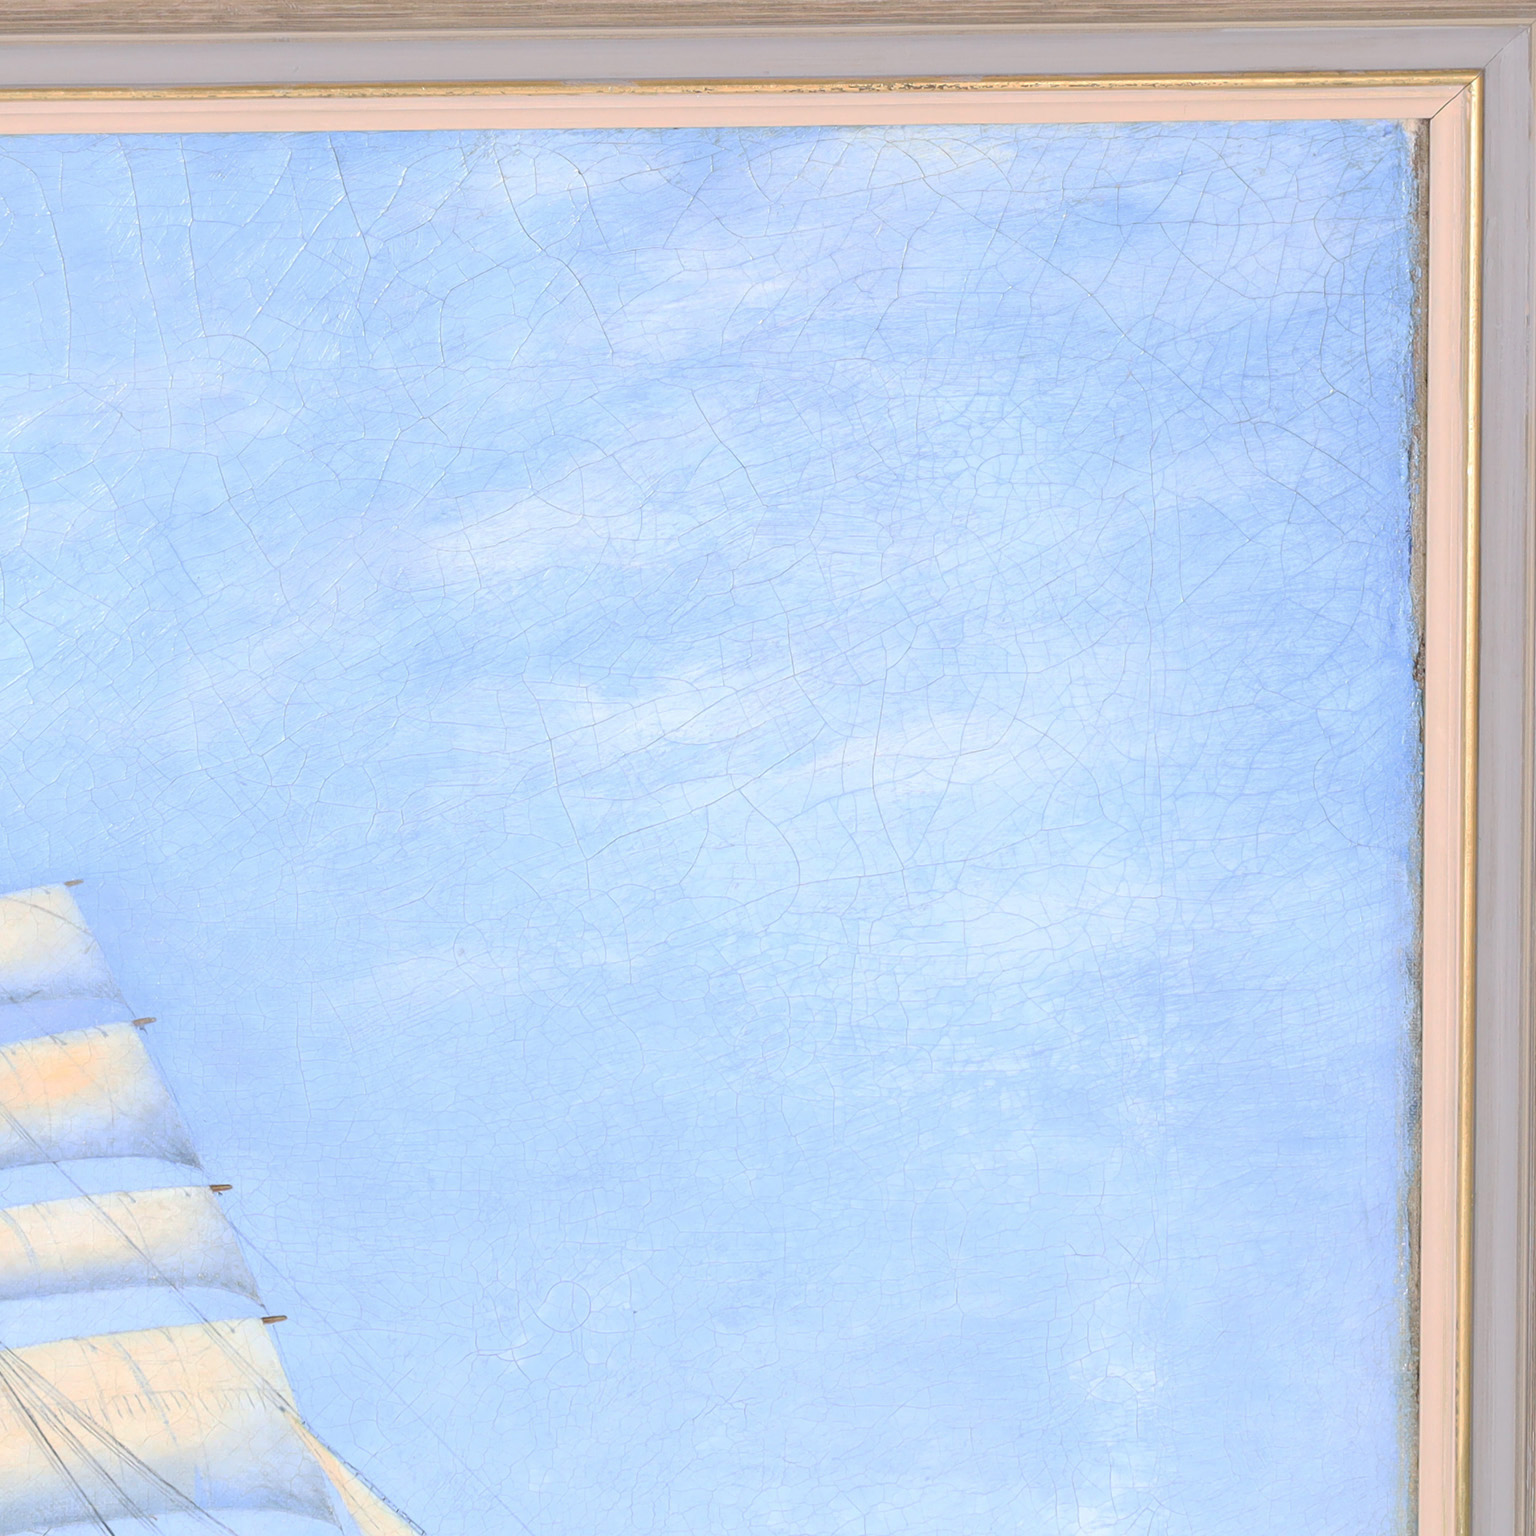 Marine Oil Painting on Canvas of a Sailing Ship